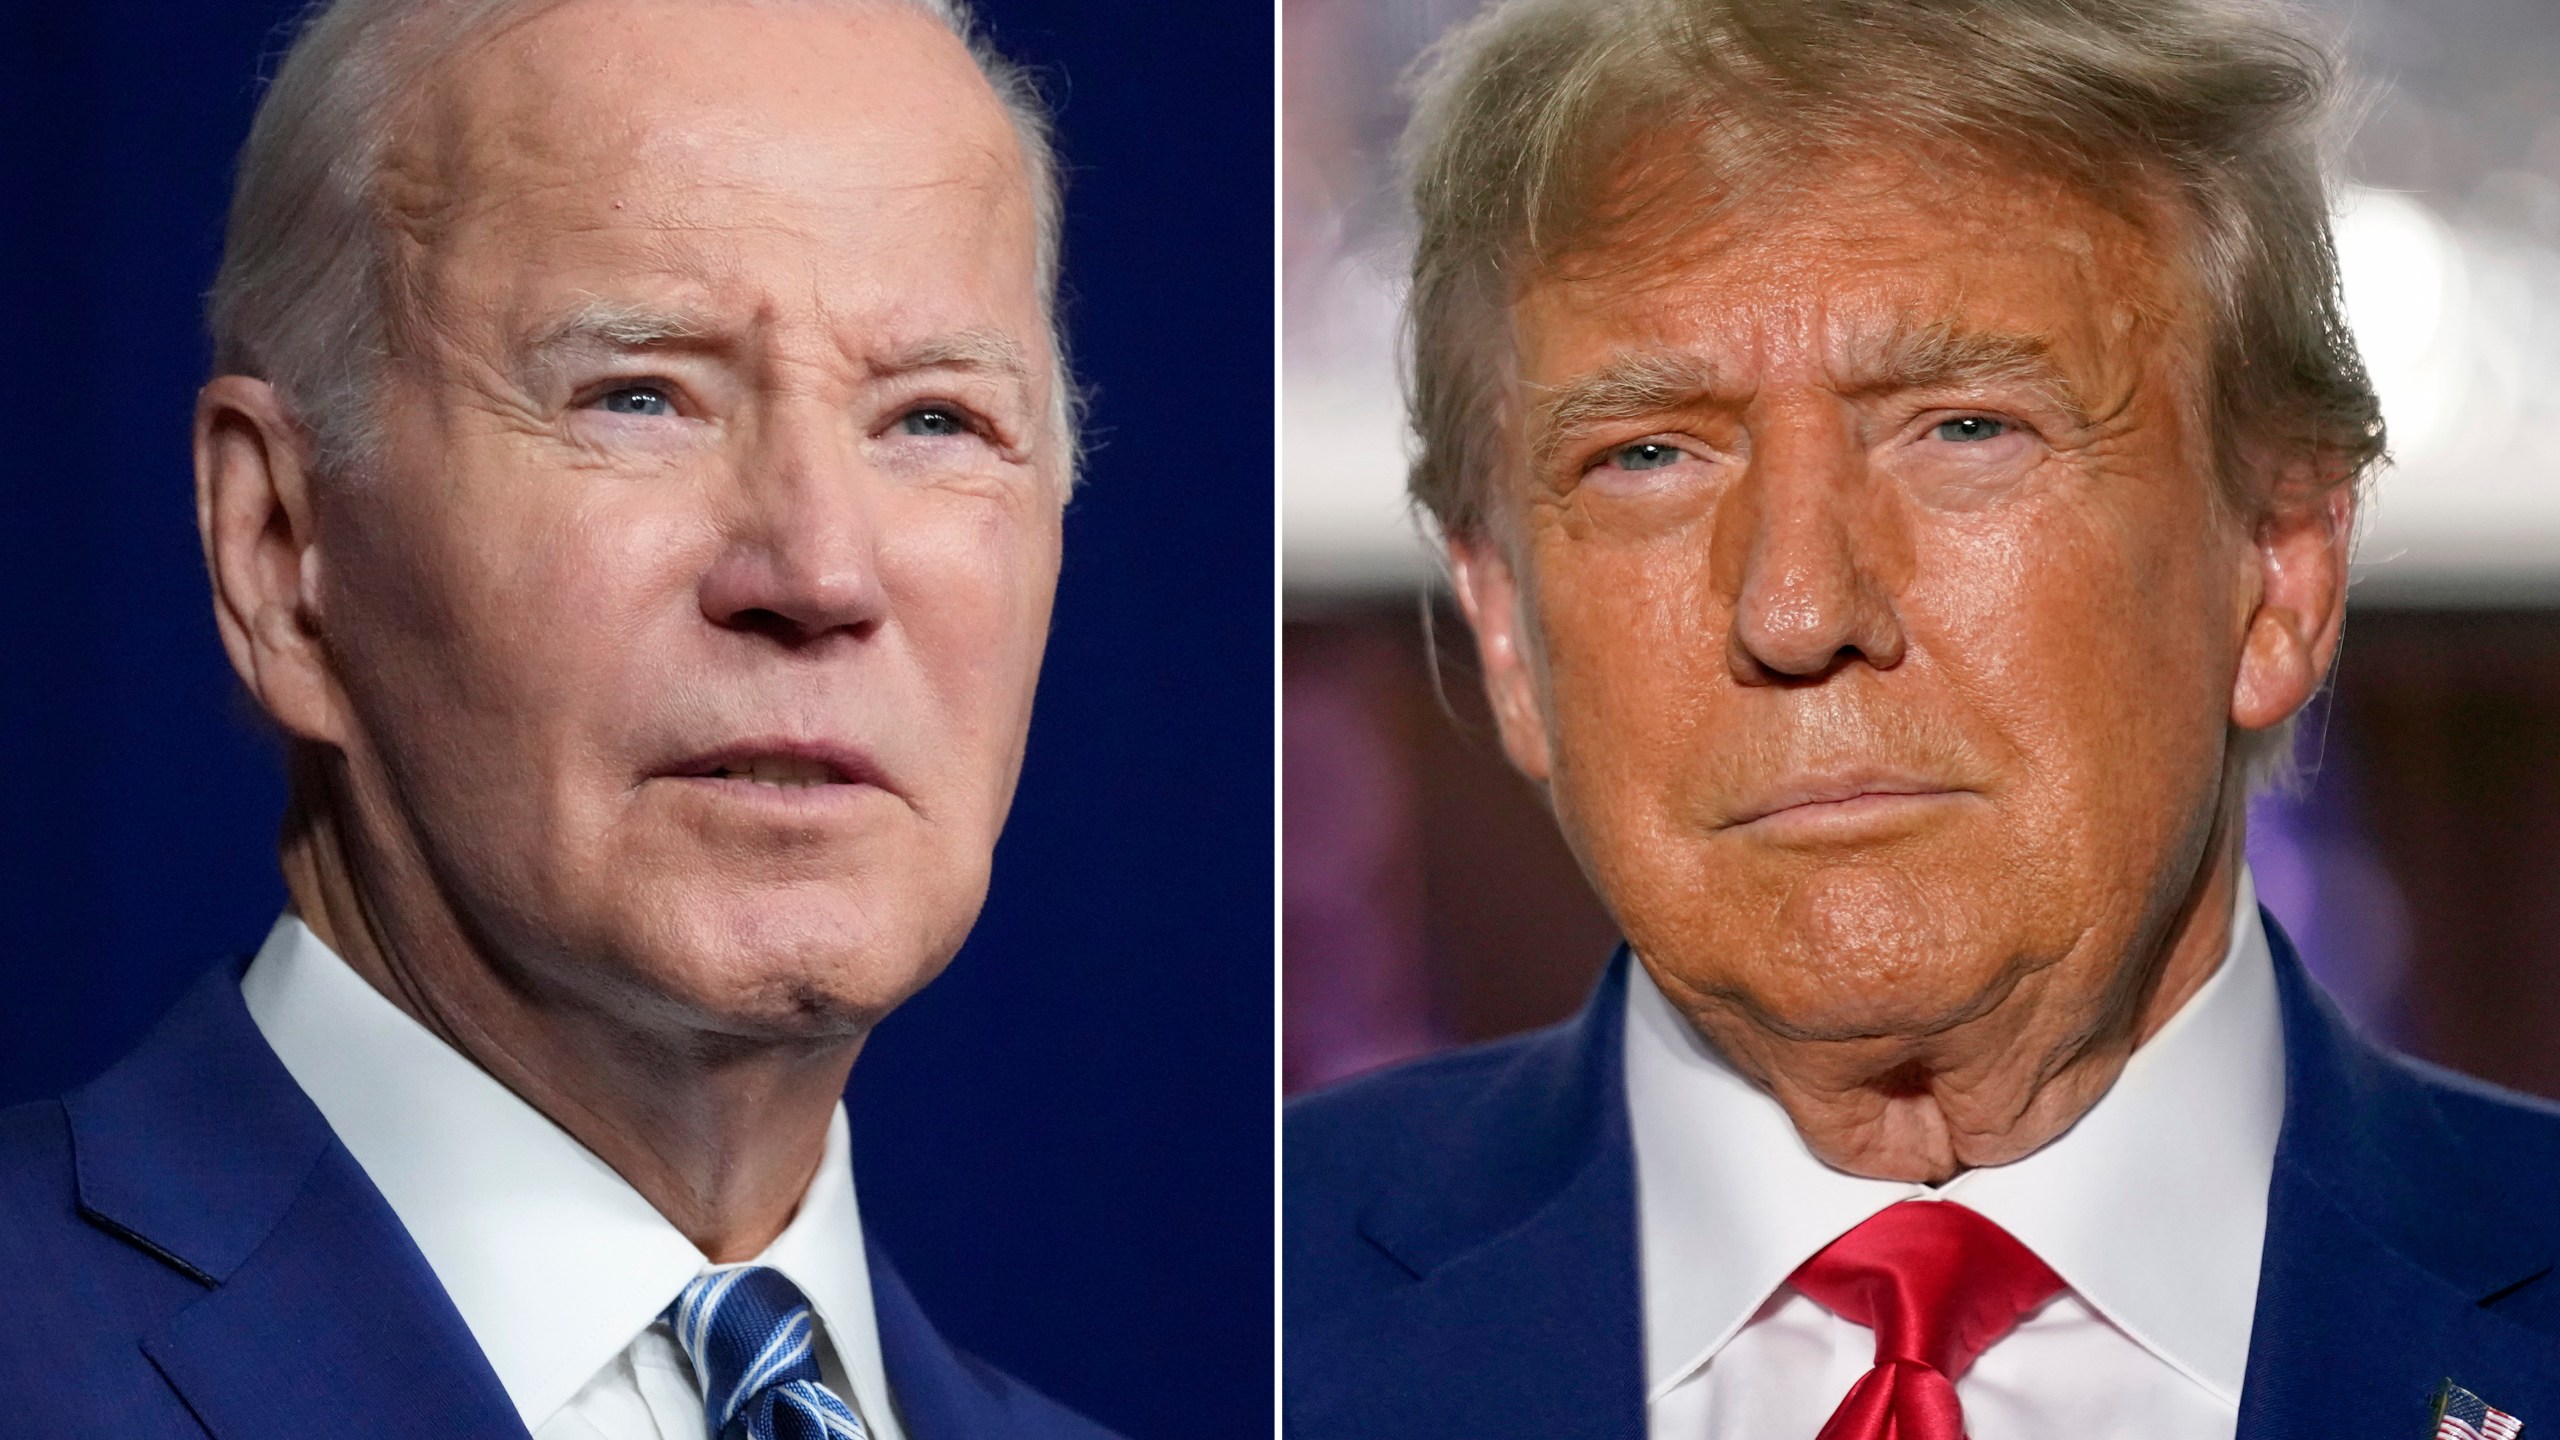 FILE - In this combination of photos, President Joe Biden, left, speaks on Aug. 10, 2023, in Salt Lake City, and former President Donald Trump speaks on June 13, 2023, in Bedminster, N.J. The sequel to the 2020 election is officially set as the president and his immediate predecessor secured their parties' nominations. Biden and Trump have set up a political movie the country has seen before — even if the last version was in black and white. (AP Photo, File)